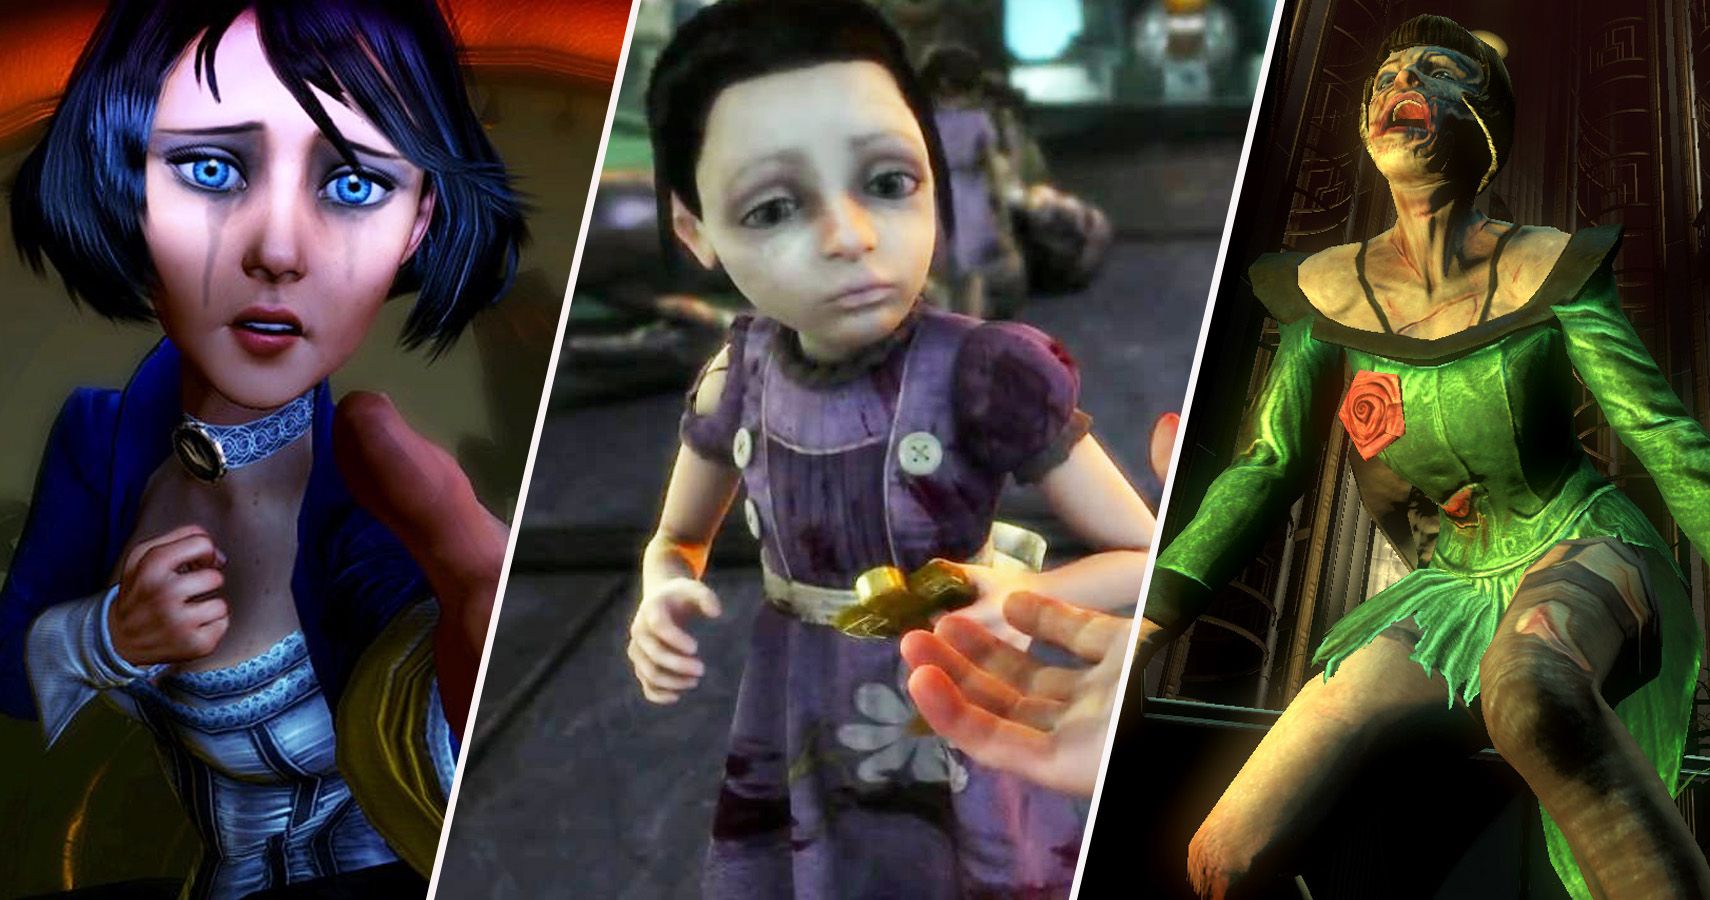 First Person Knitter: Bioshock Infinite Main characters-Part 2